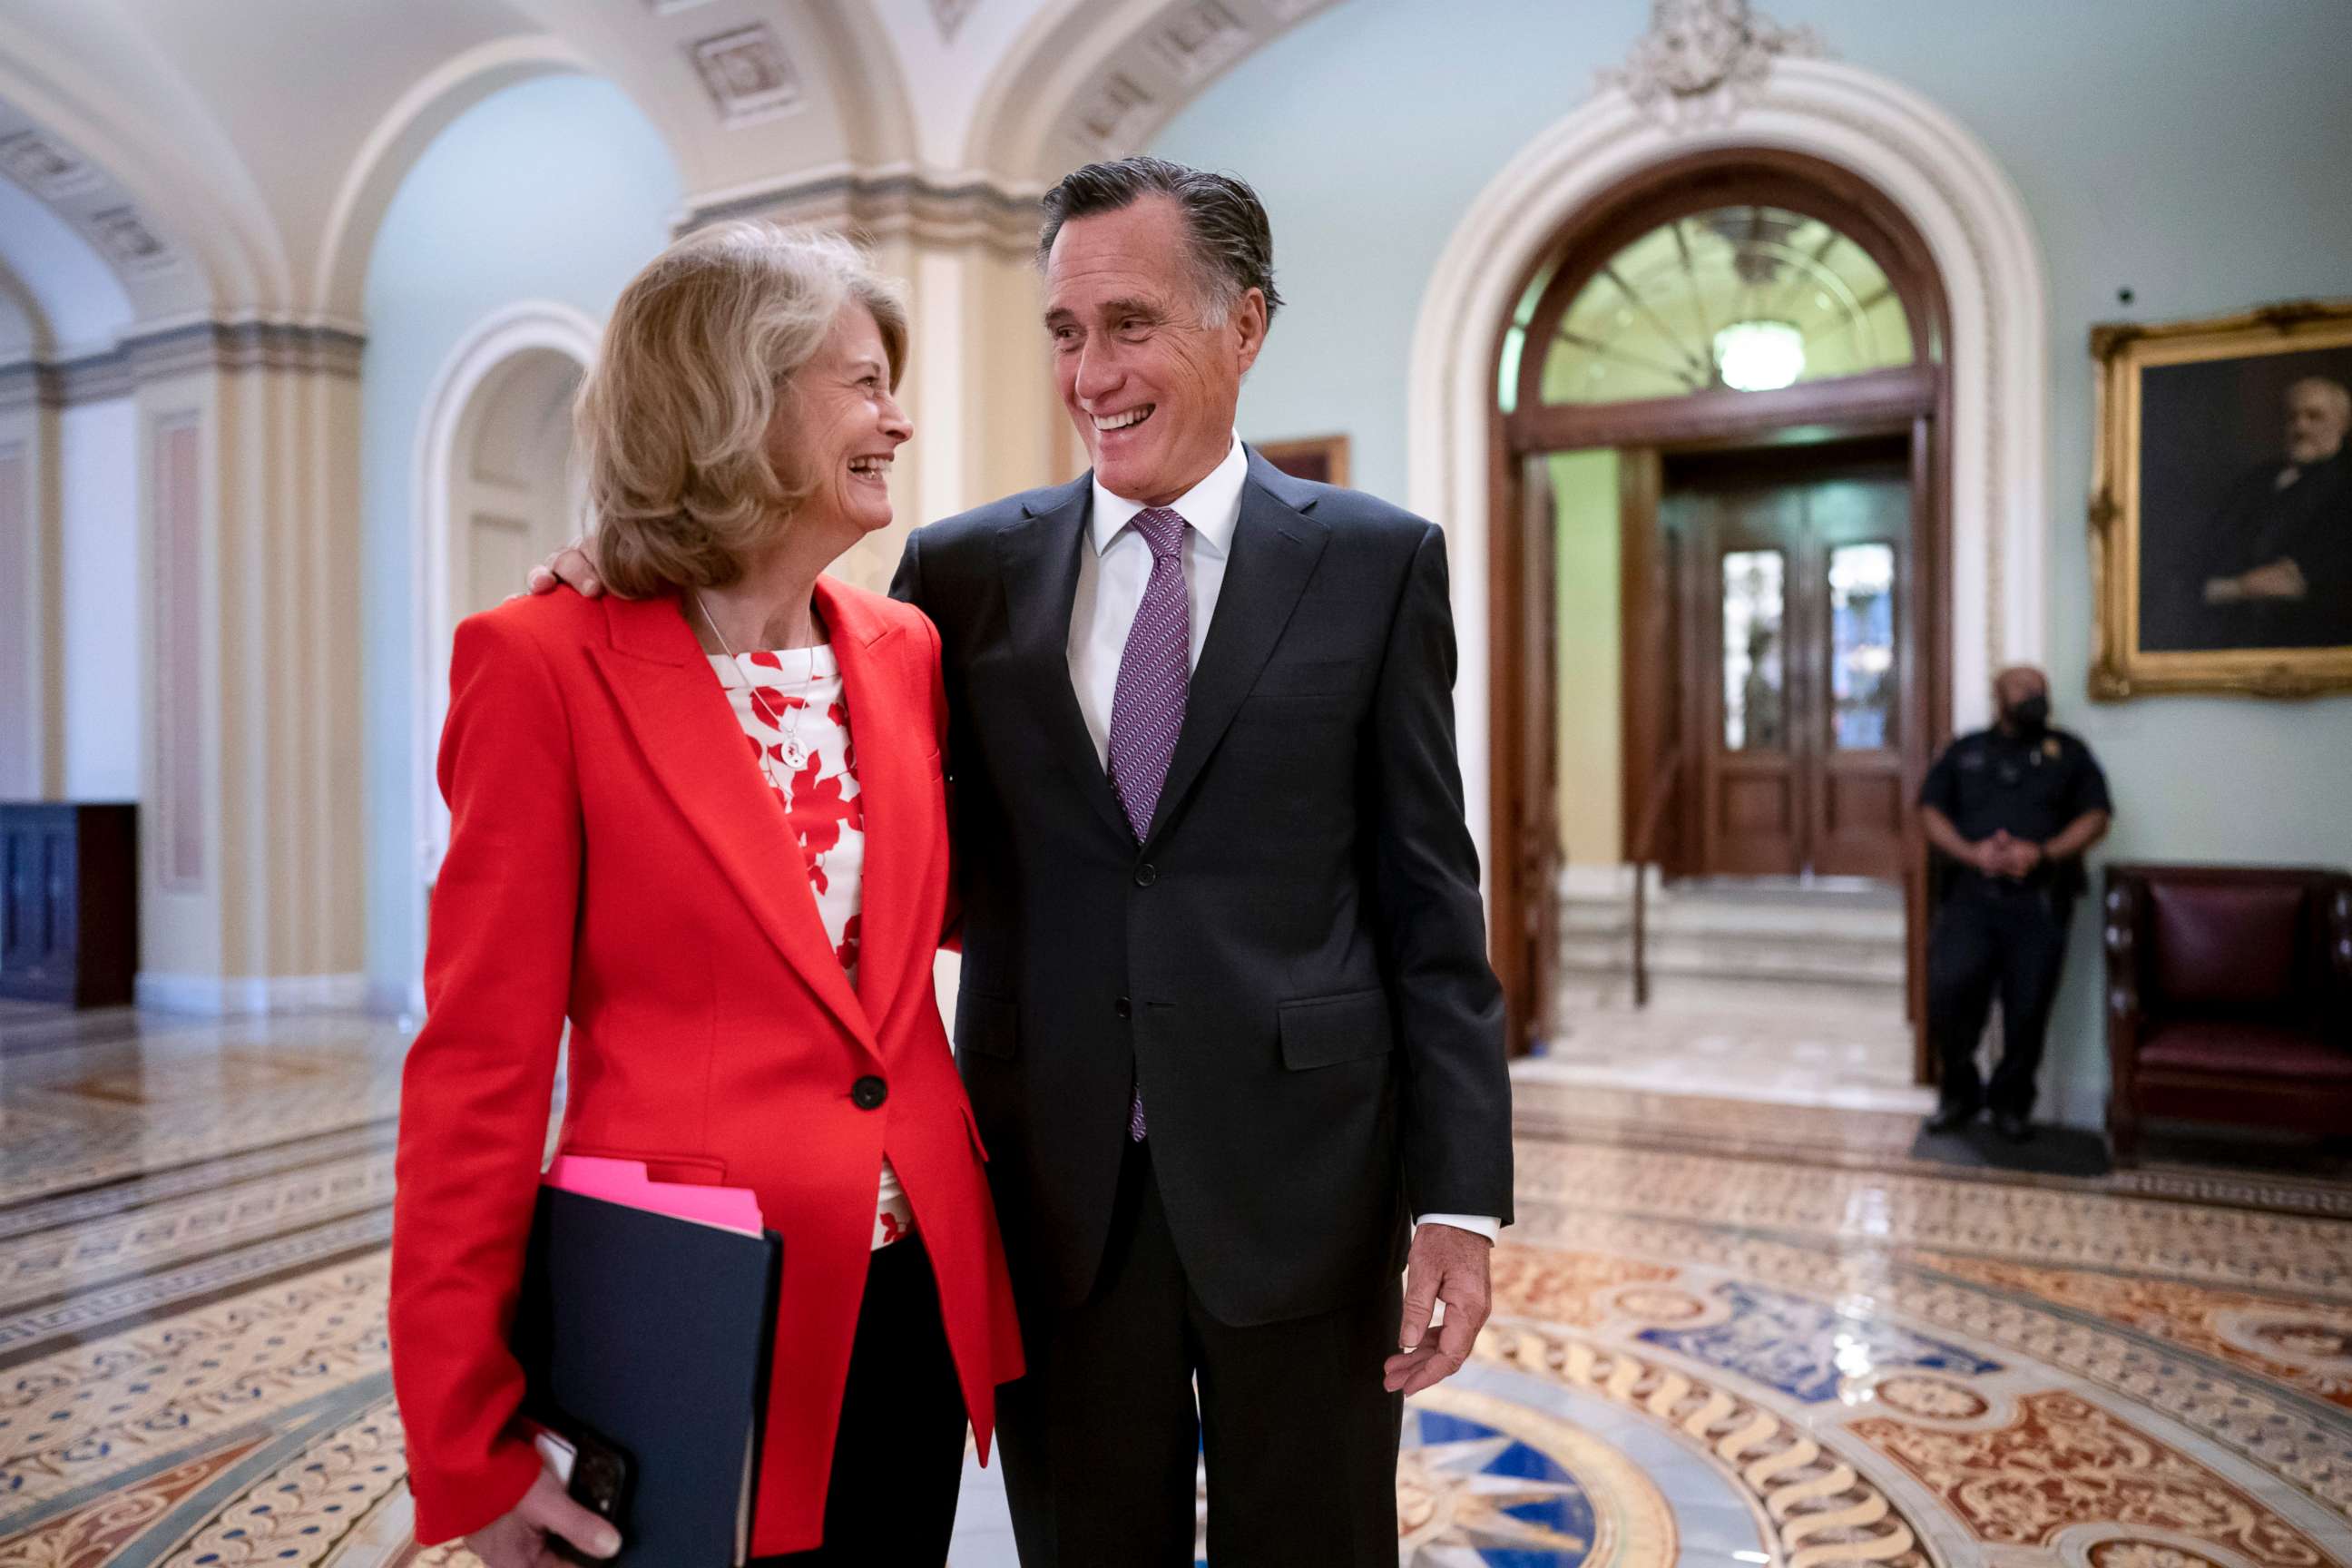 PHOTO: Republican Senators Lisa Murkowski, left, and Mitt Romney, who say they will vote to confirm Judge Ketanji Brown Jackson's historic nomination to the Supreme Court, smile as they greet each other at the Capitol in Washington, April 5, 2022.